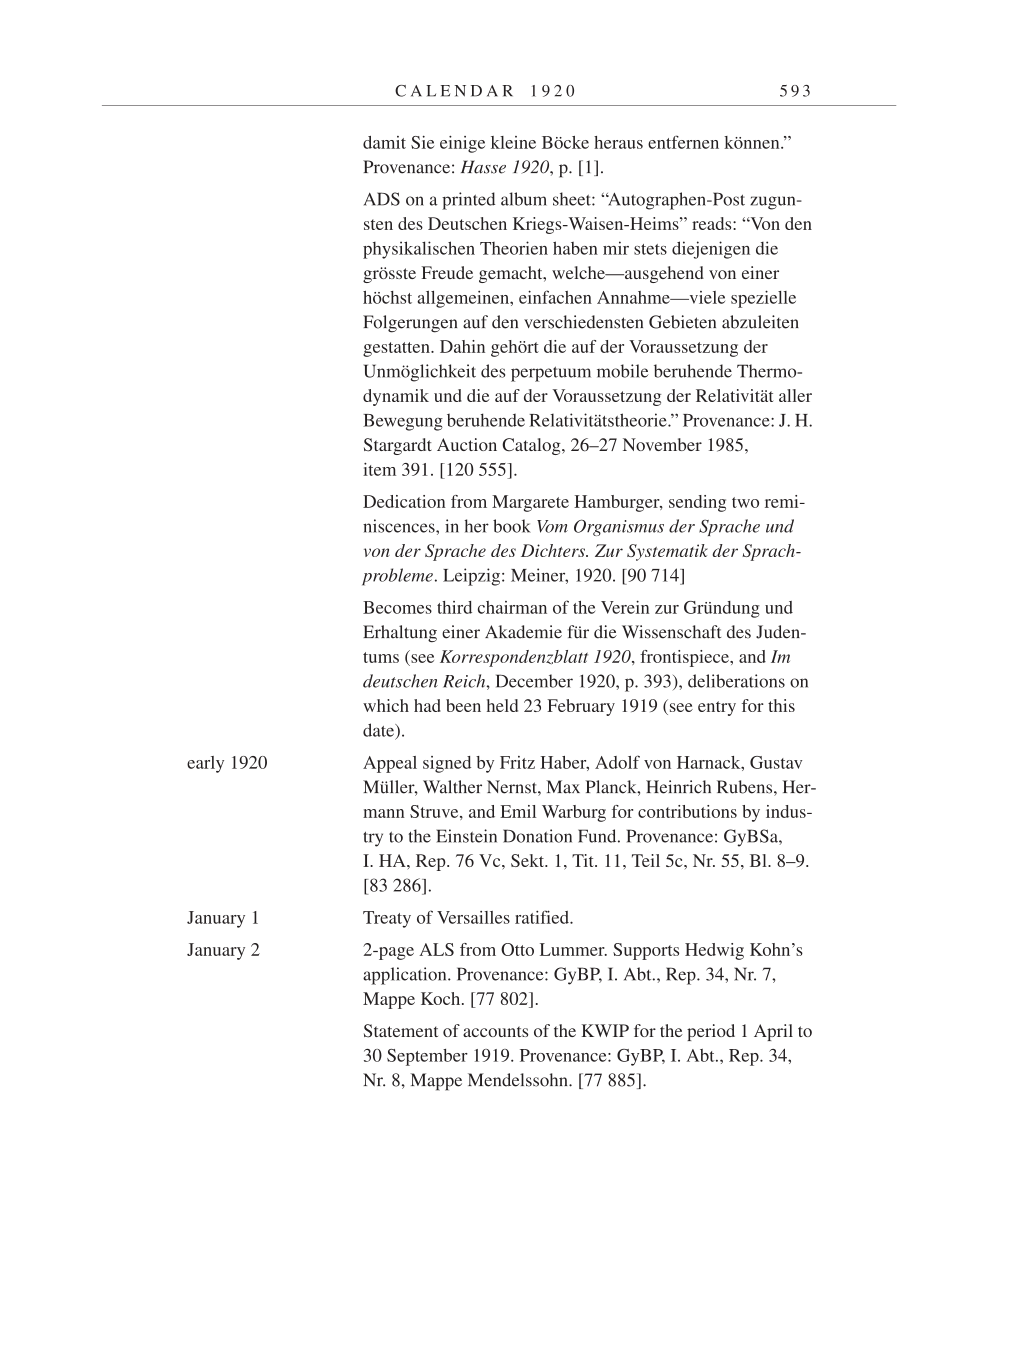 Volume 9: The Berlin Years: Correspondence January 1919-April 1920 page 593